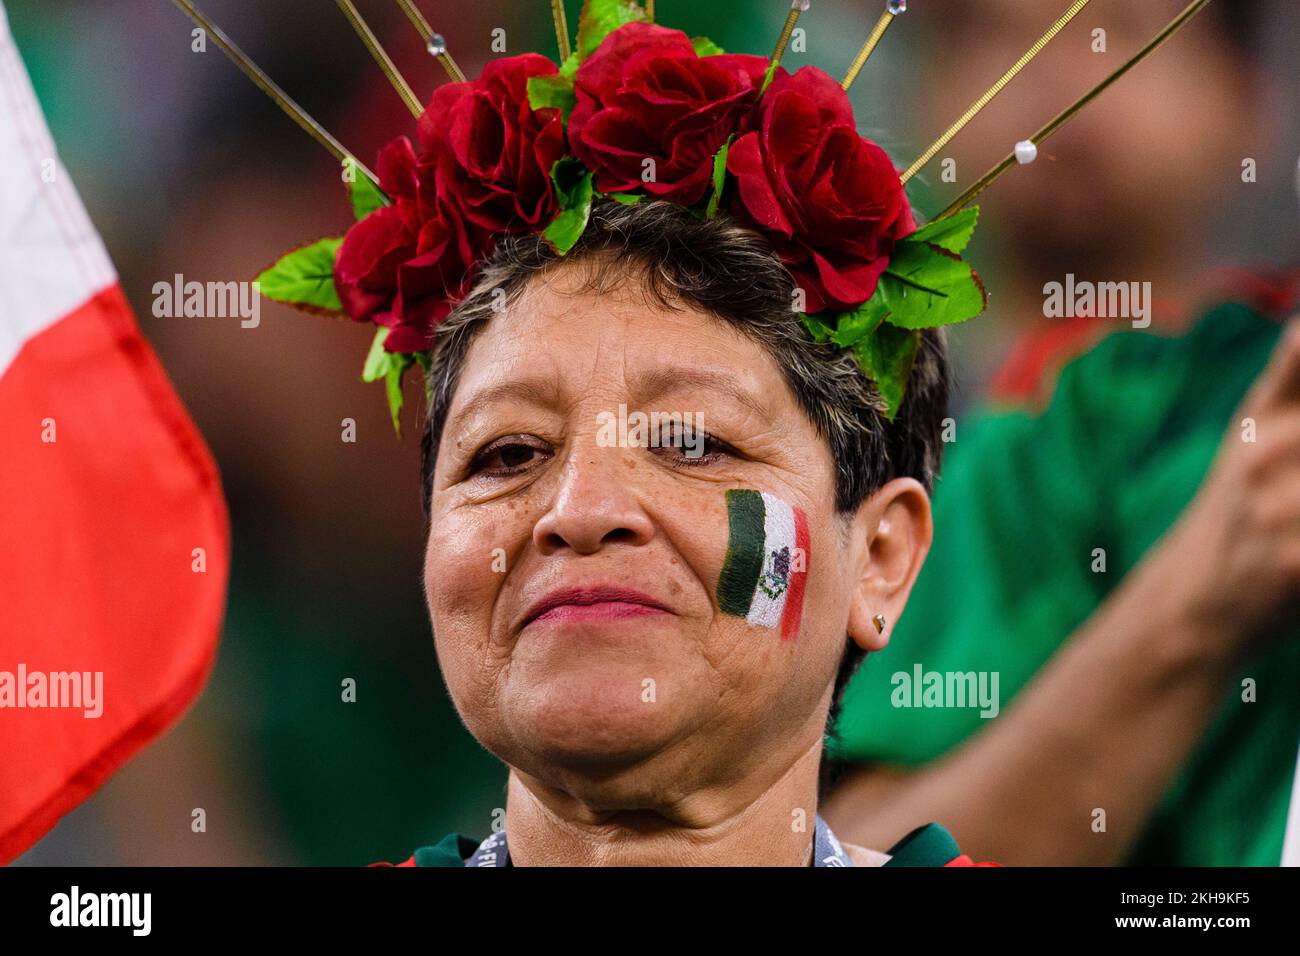 Doha, Qatar. 22nd Nov, 2022. Estadio 974 Torcida do Mexico before the match between Mexico and Poland, valid for the group stage of the World Cup, held at Estadio 974 in Doha, Qatar. (Marcio Machado/SPP) Credit: SPP Sport Press Photo. /Alamy Live News Stock Photo